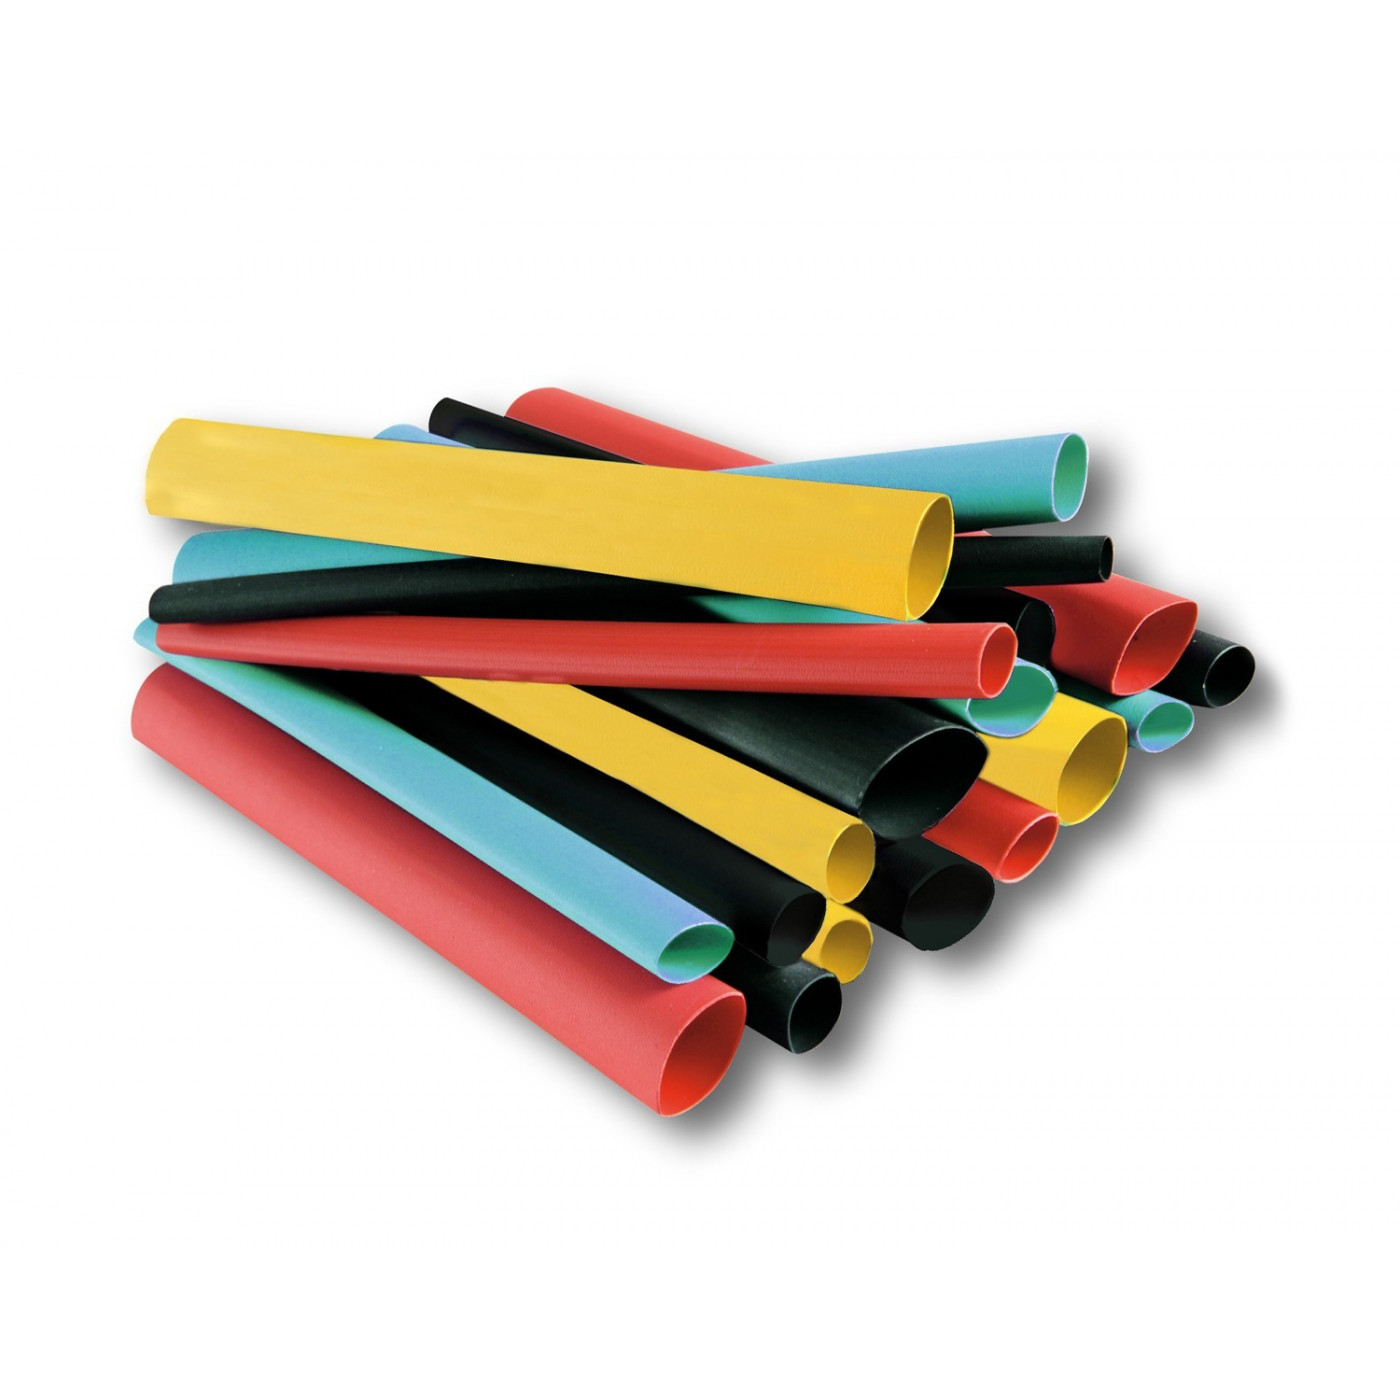 Heat Shrink Tubing Set 240 Pieces 4 5 7 And 8 Mm Wood Tools And Deco 